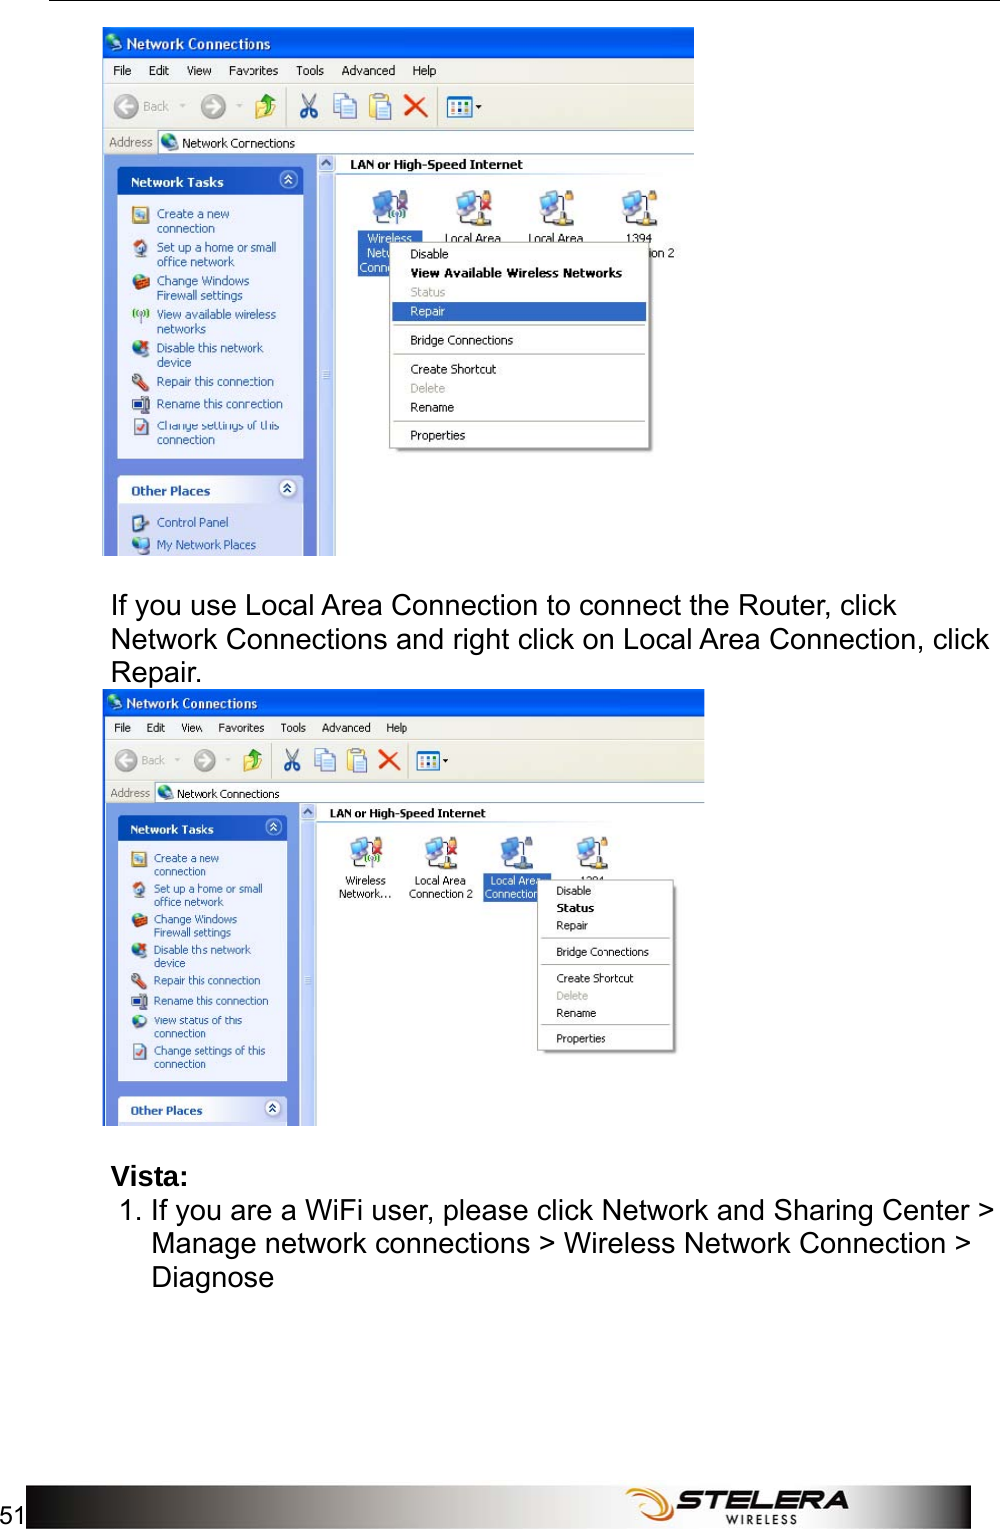  Appendix A: FAQ 51    If you use Local Area Connection to connect the Router, click Network Connections and right click on Local Area Connection, click Repair.     Vista:  1. If you are a WiFi user, please click Network and Sharing Center &gt; Manage network connections &gt; Wireless Network Connection &gt; Diagnose   